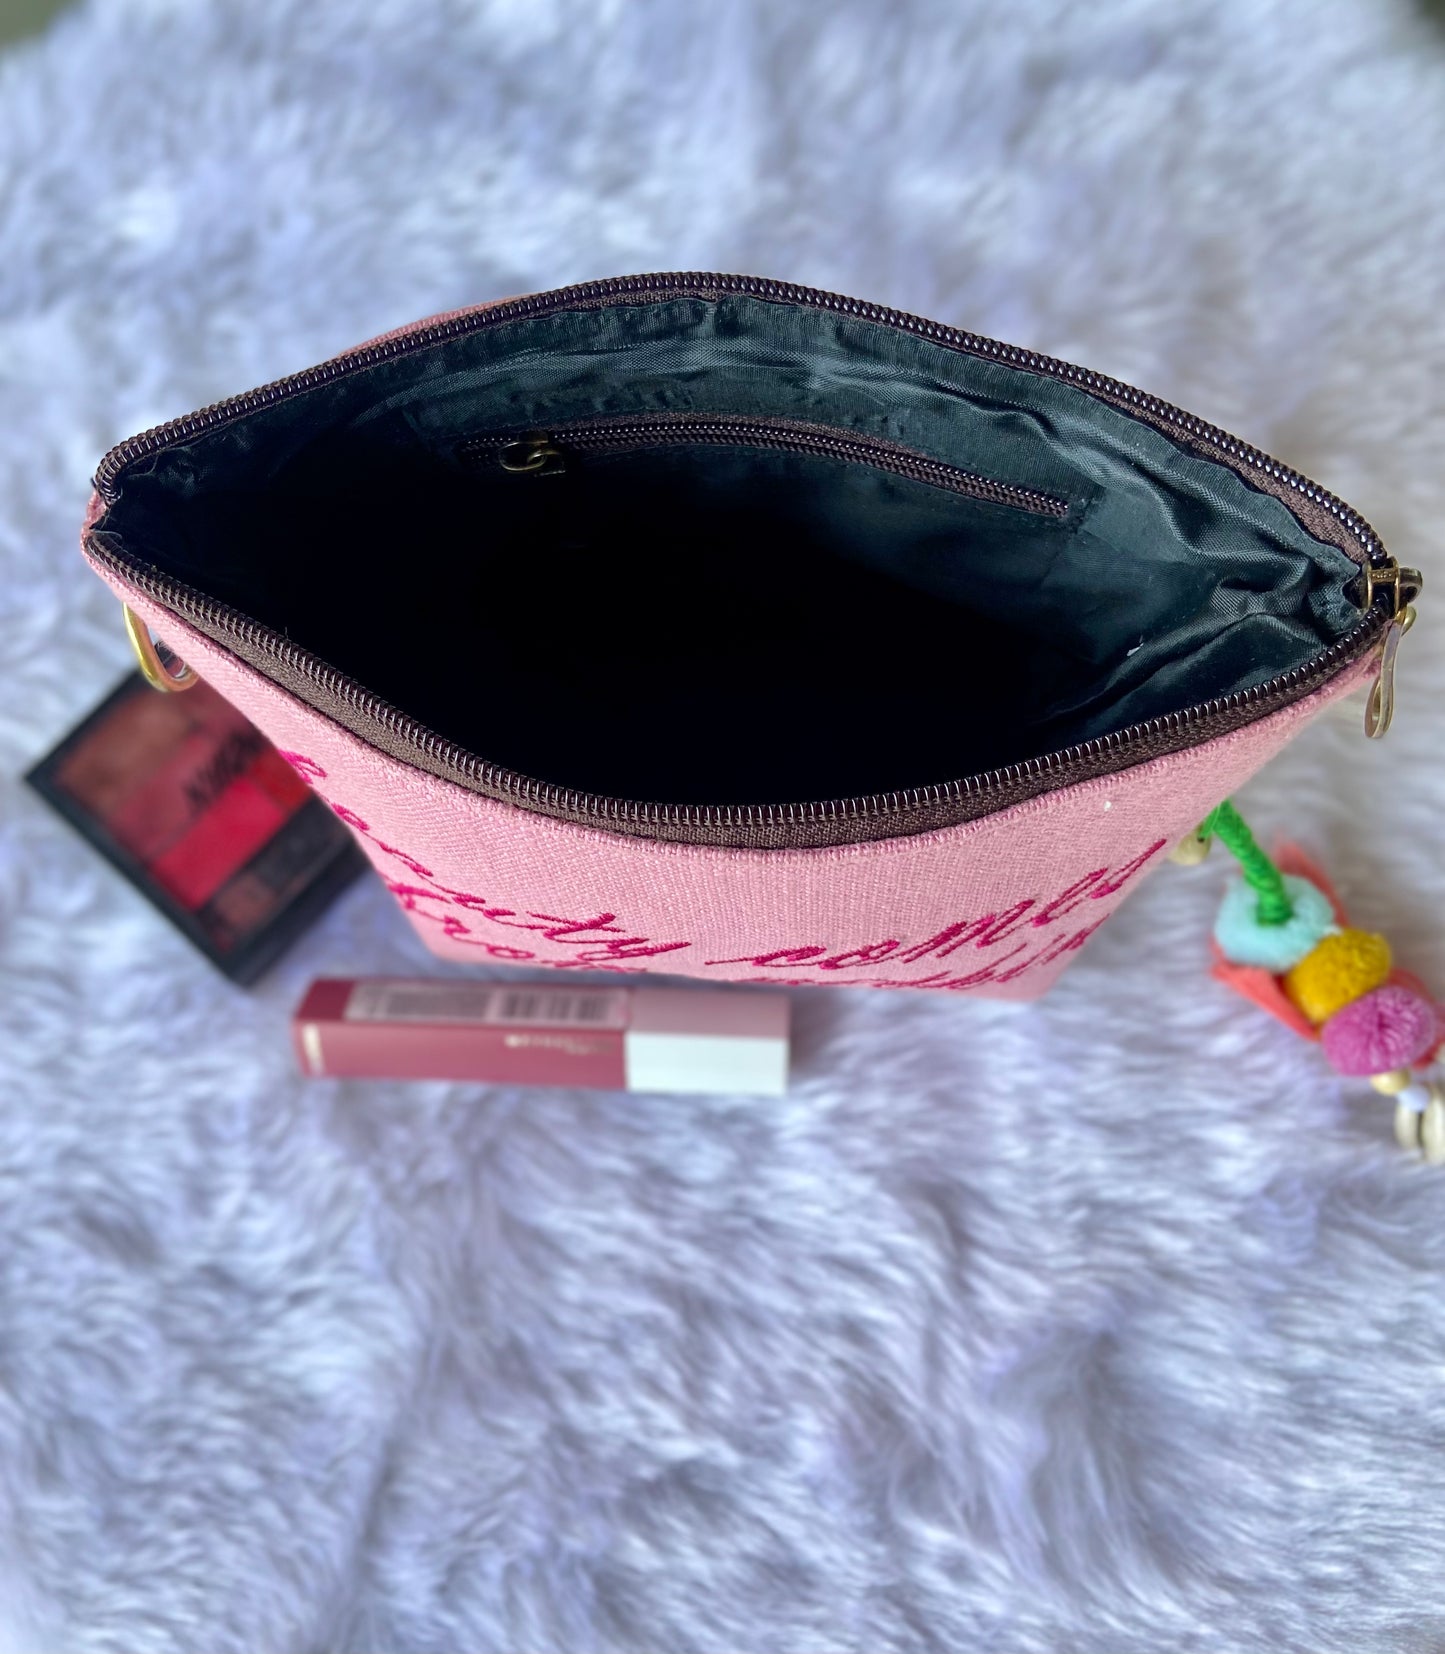 Beauty Comes from Within-Pink Vanity Pouch